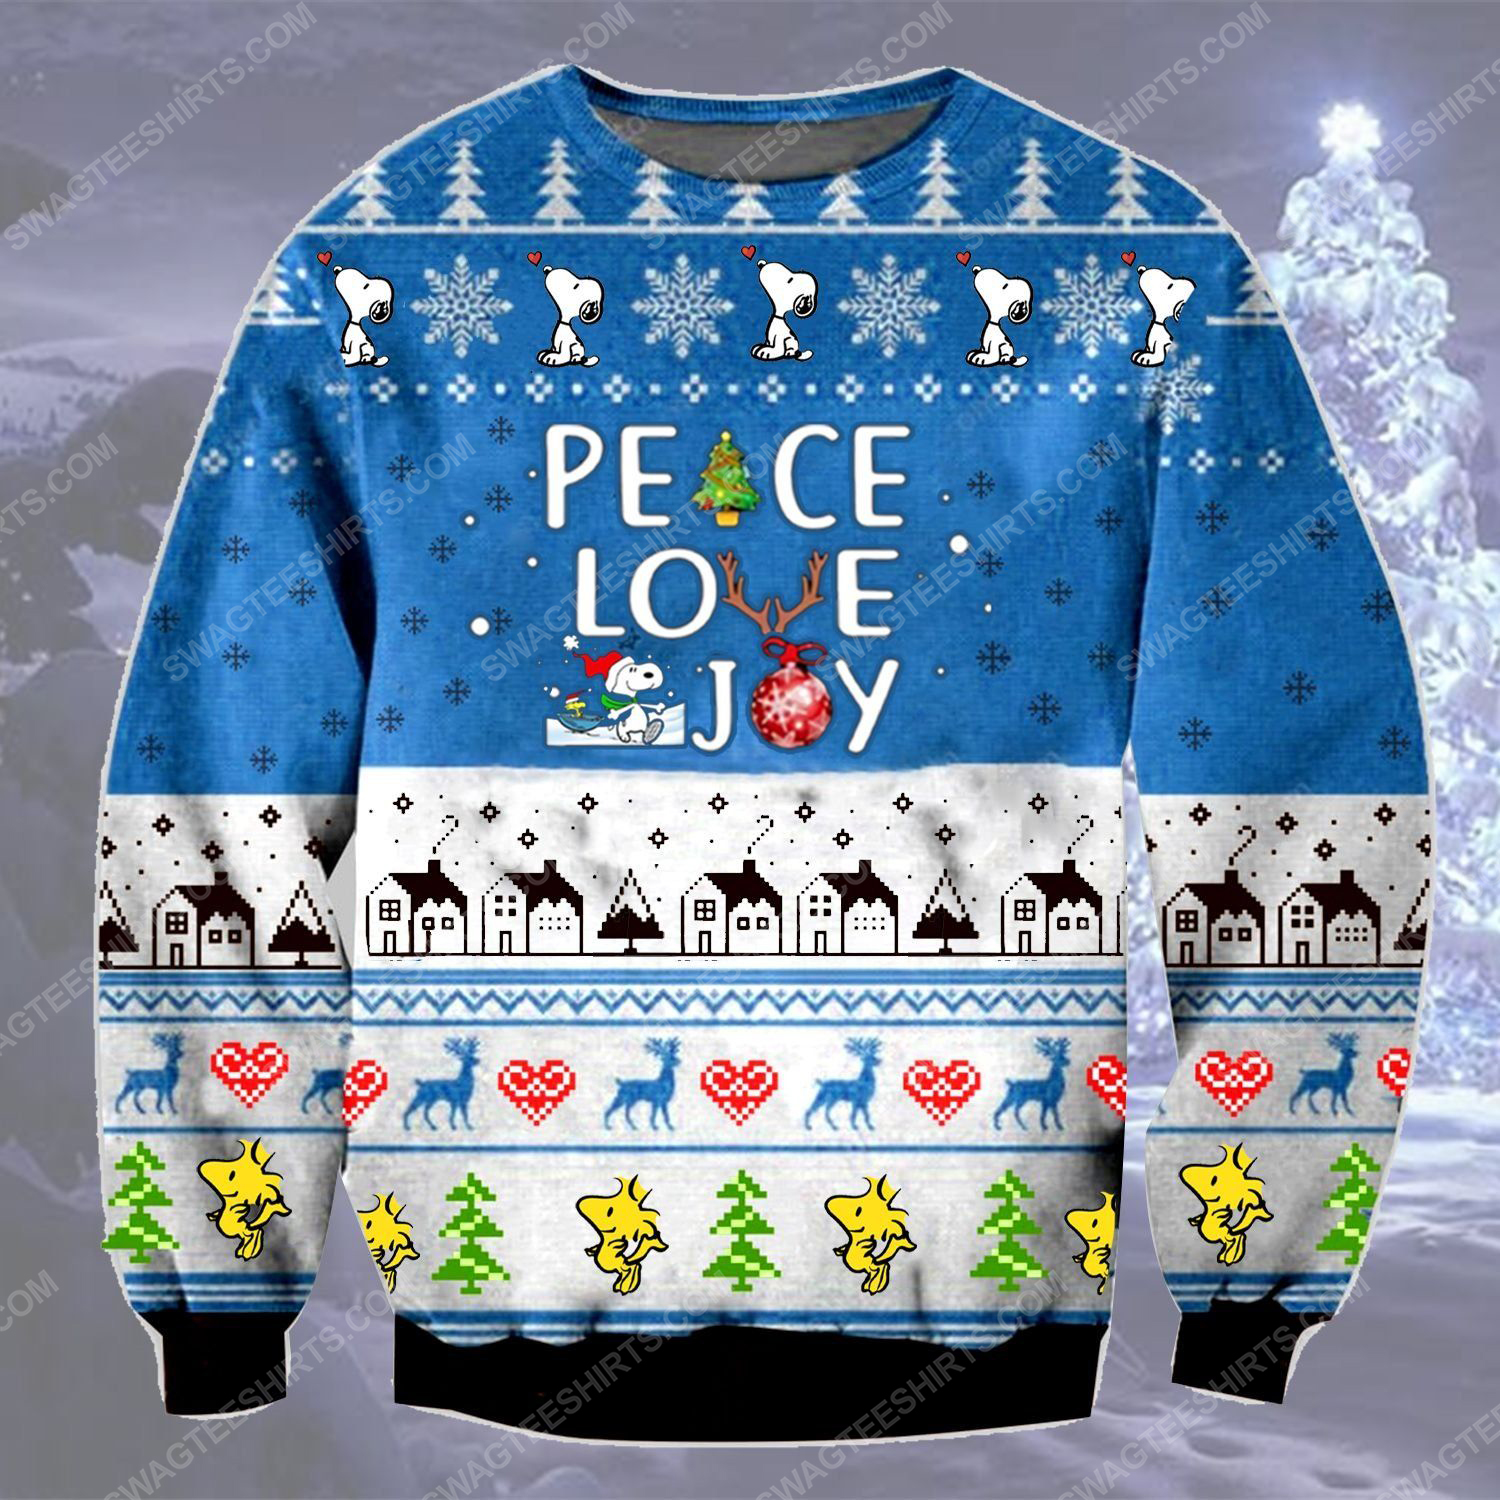 [special edition] Charlie brown and snoopy peace love joy ugly christmas sweater – maria